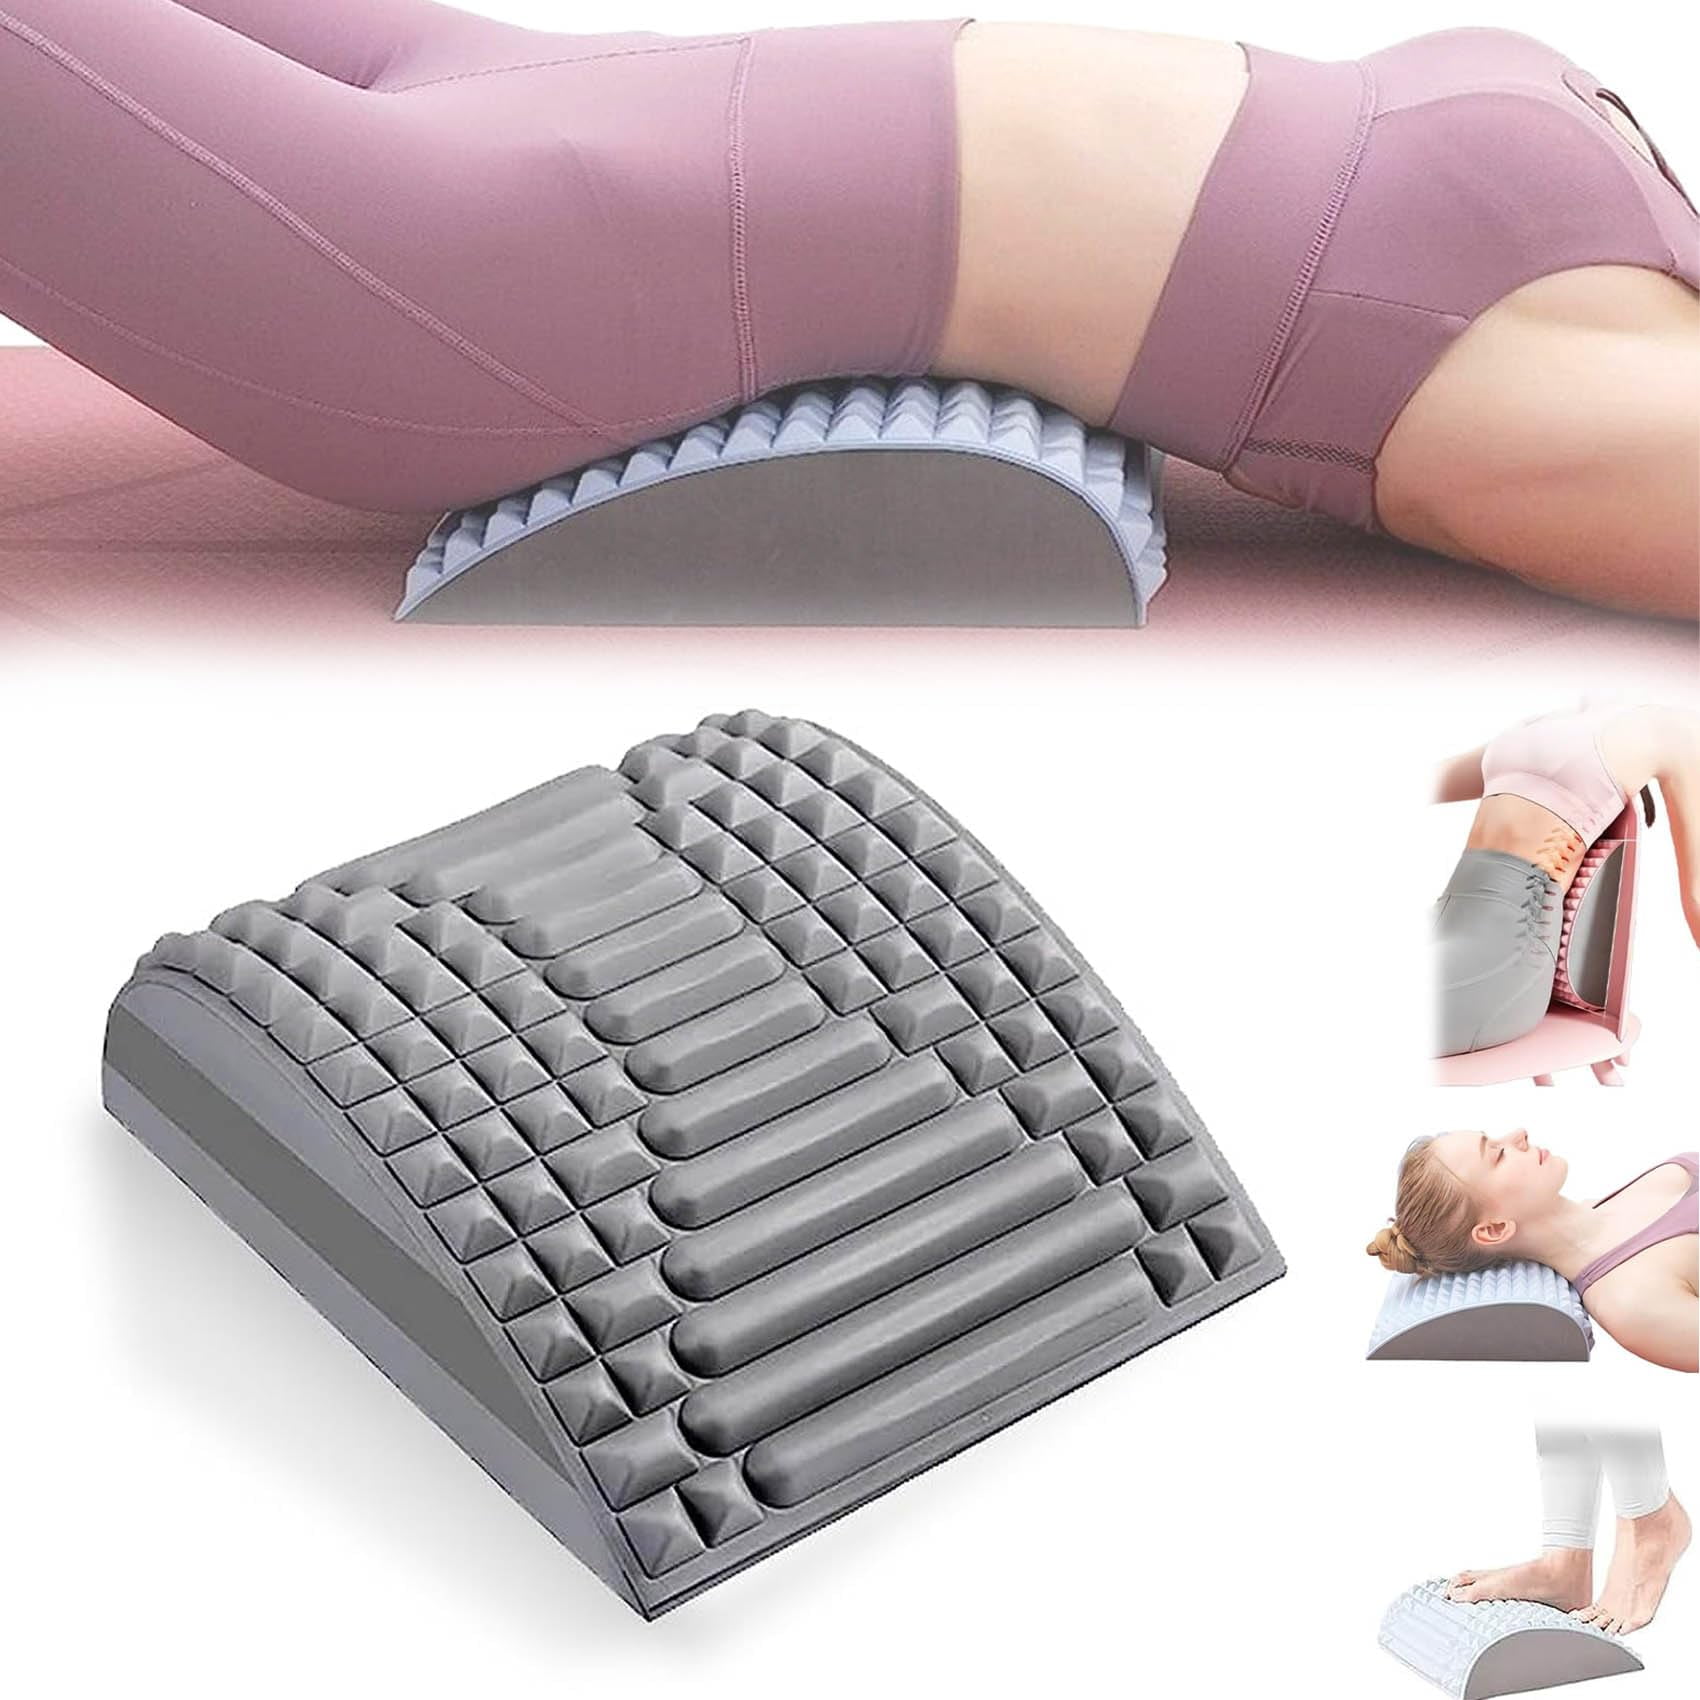 Lower Back Pain Relief Treatment Stretcher, Chronic Lumbar Support